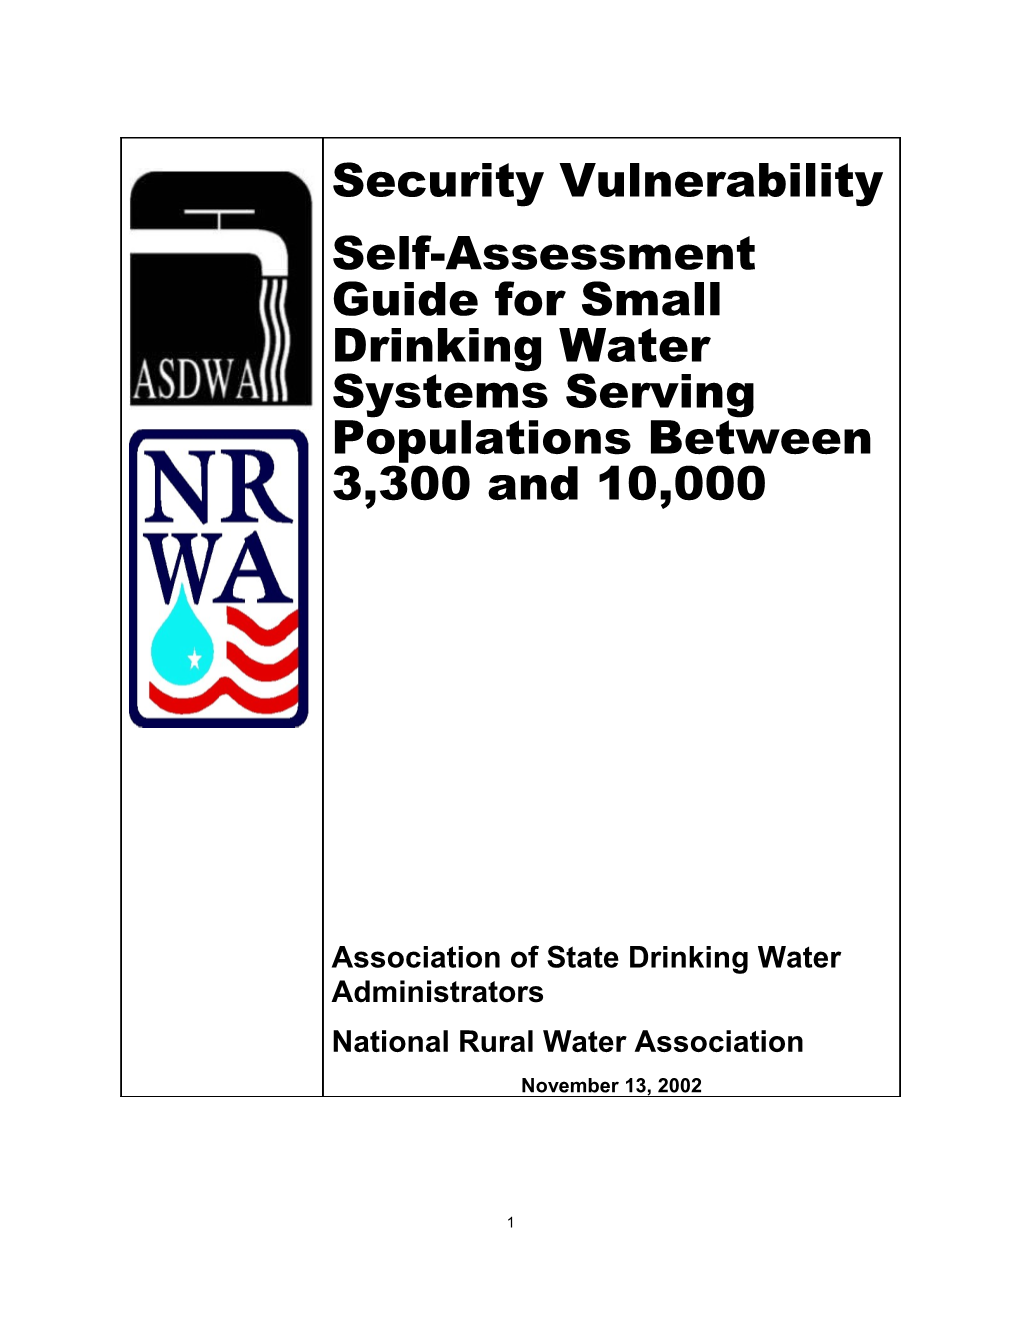 Security Vulnerability Self-Assessment Guide for Small Water Systems 4